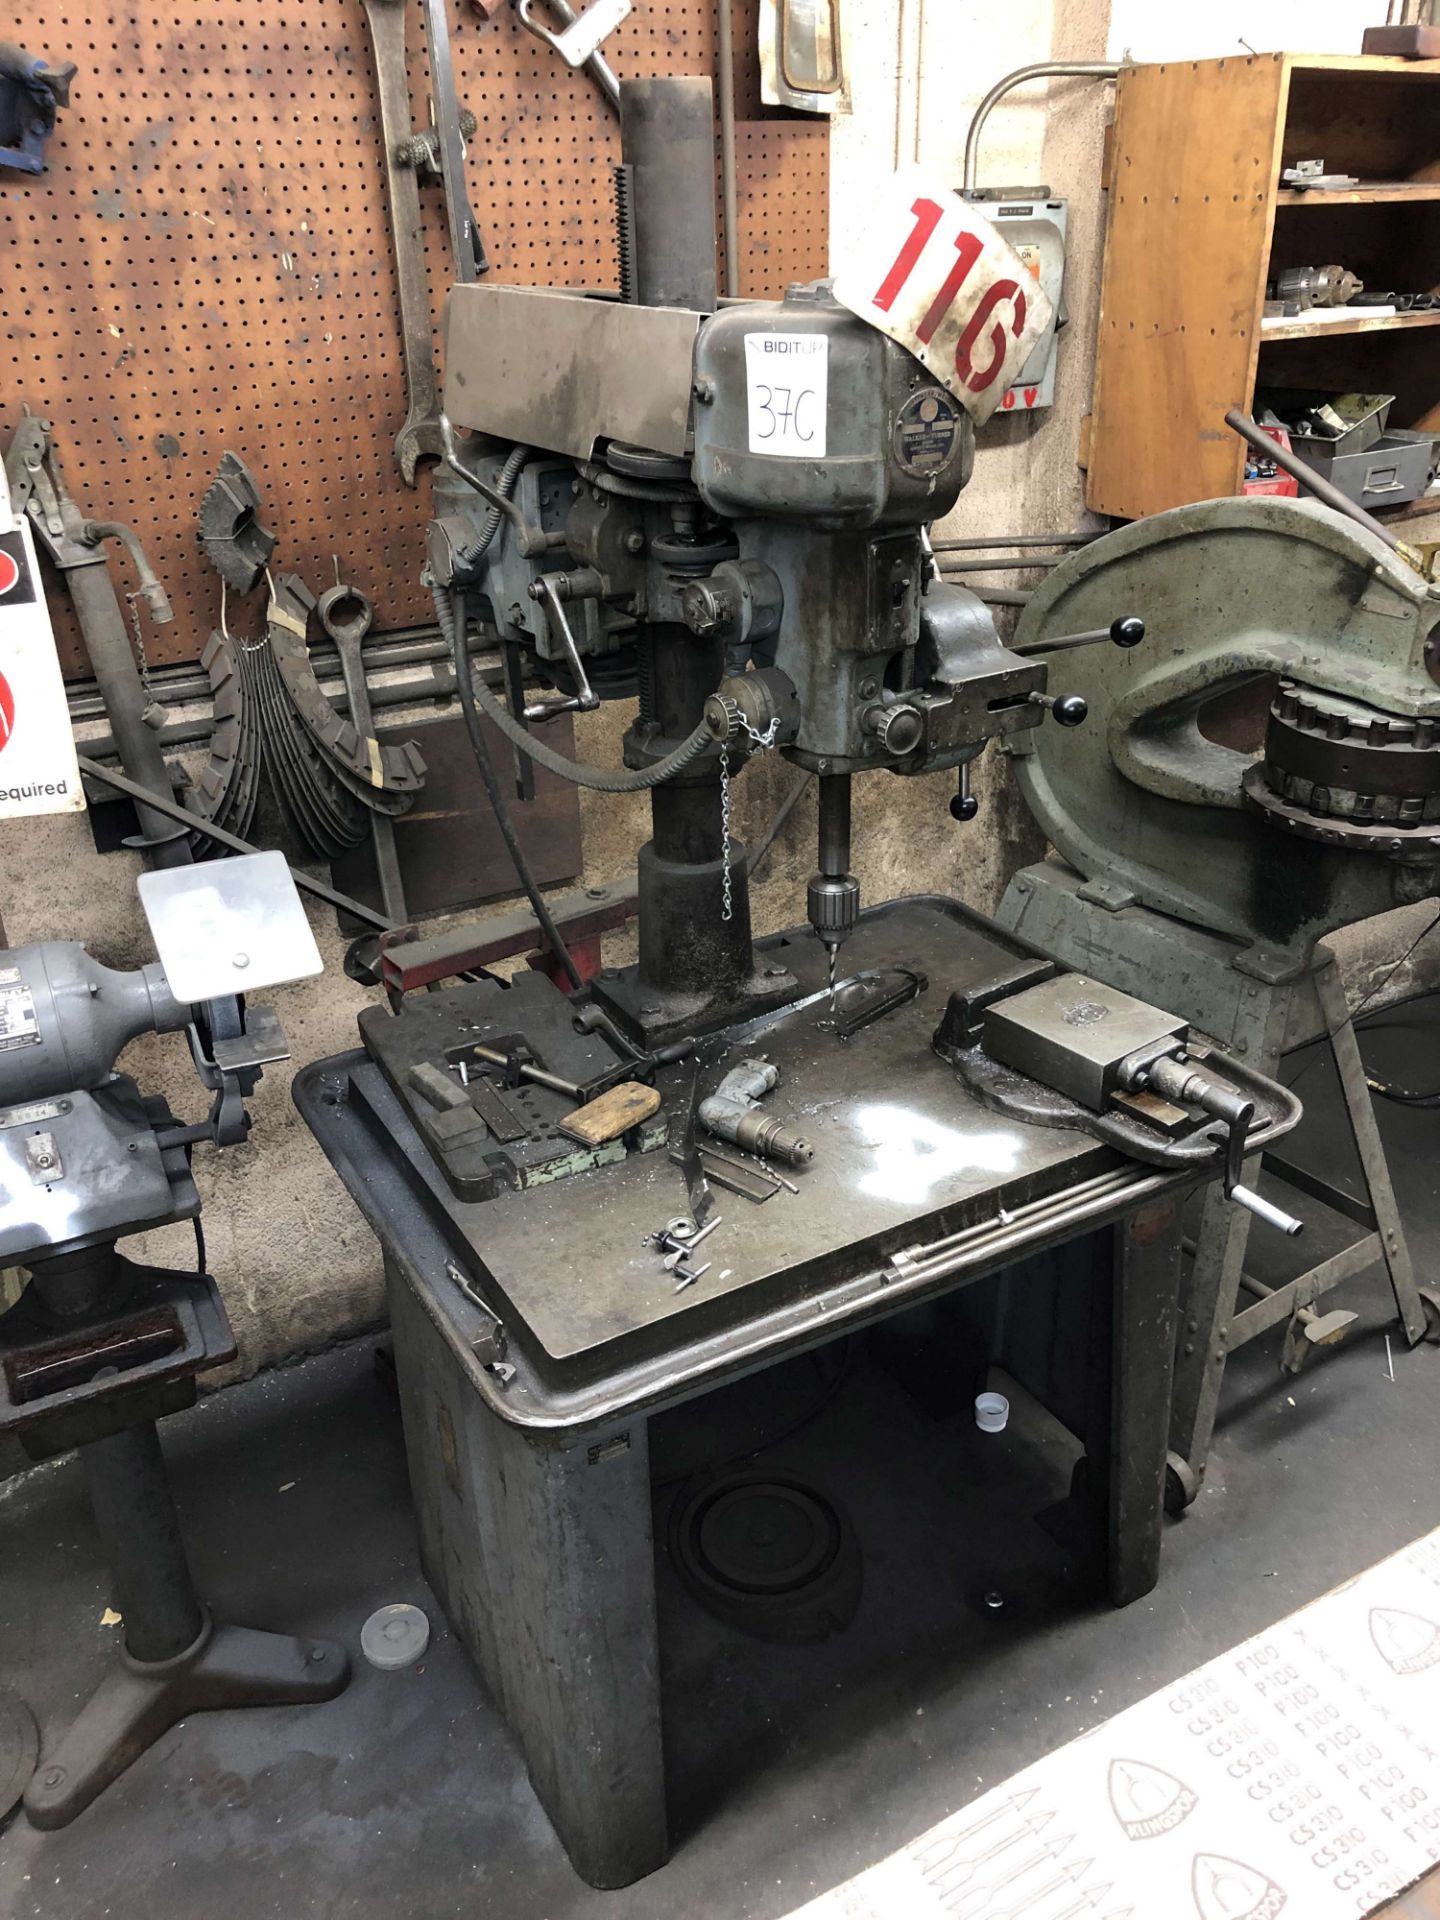 Walker-Turner 18" Drill Press, Table: 35-1/2" L to R, 24-1/2" F to B, Model 1143-24, S/N 0000221 - Image 2 of 3